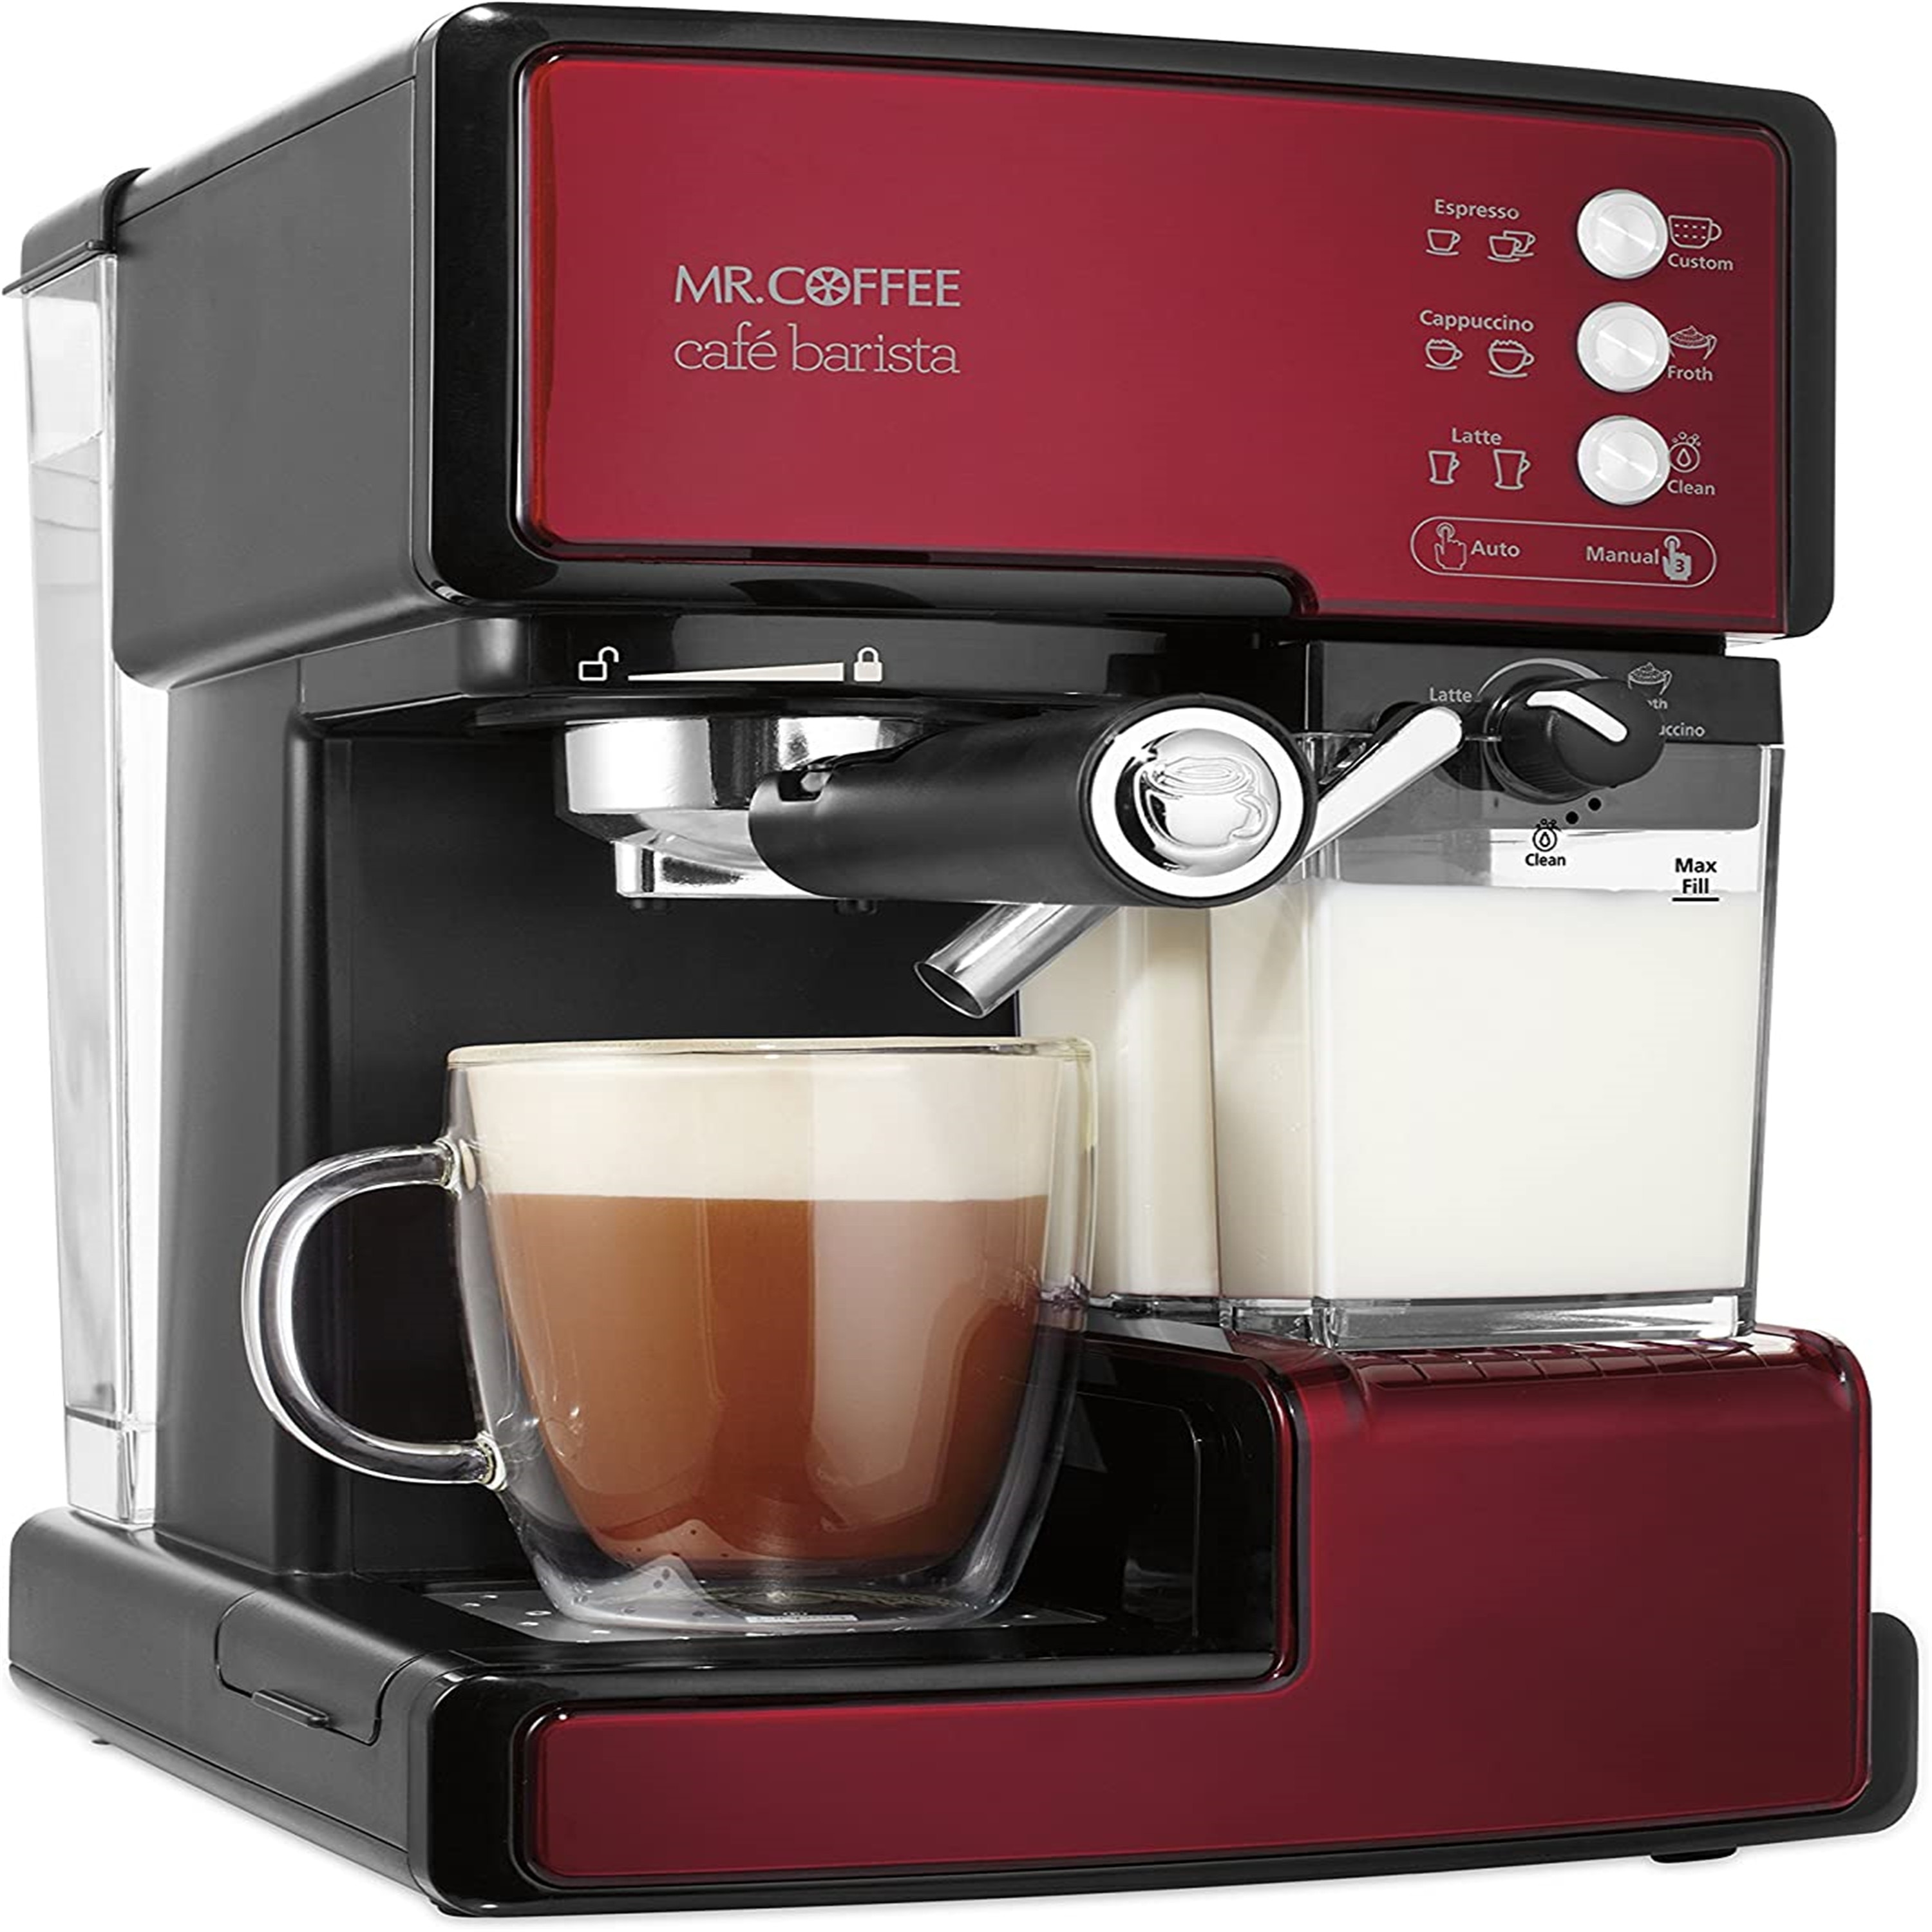 https://ak1.ostkcdn.com/images/products/is/images/direct/65a9411ddd70e1d630872c62adcdbdf1ee42a089/Cafe-Barista-Espresso-and-Cappuccino-Maker%2C-Red---BVMC-ECMP1106.jpg